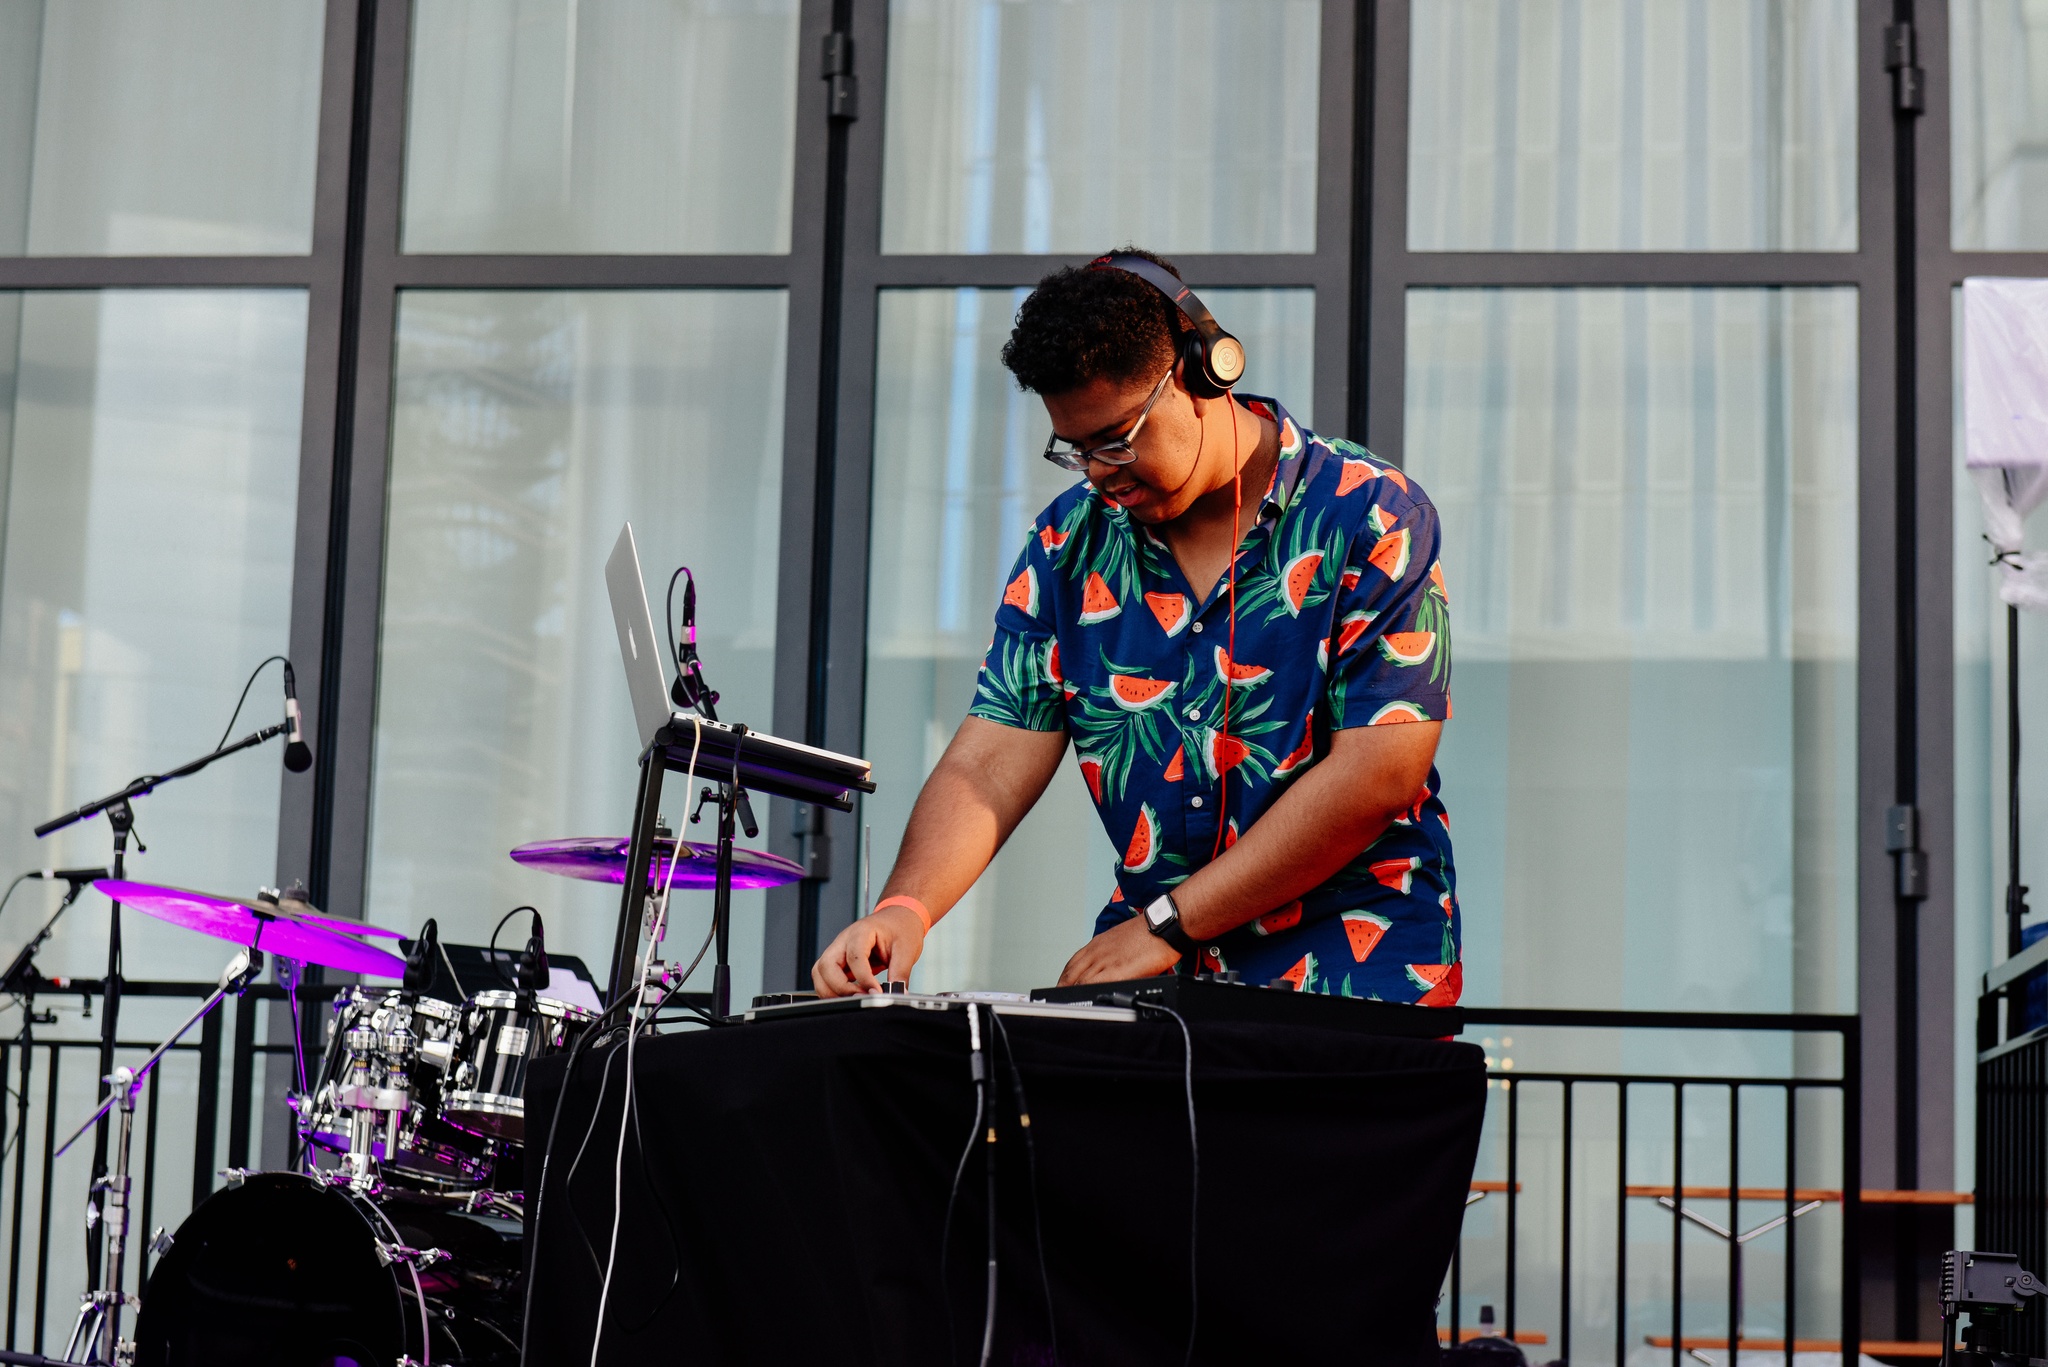 DJ performing on outdoor stage.